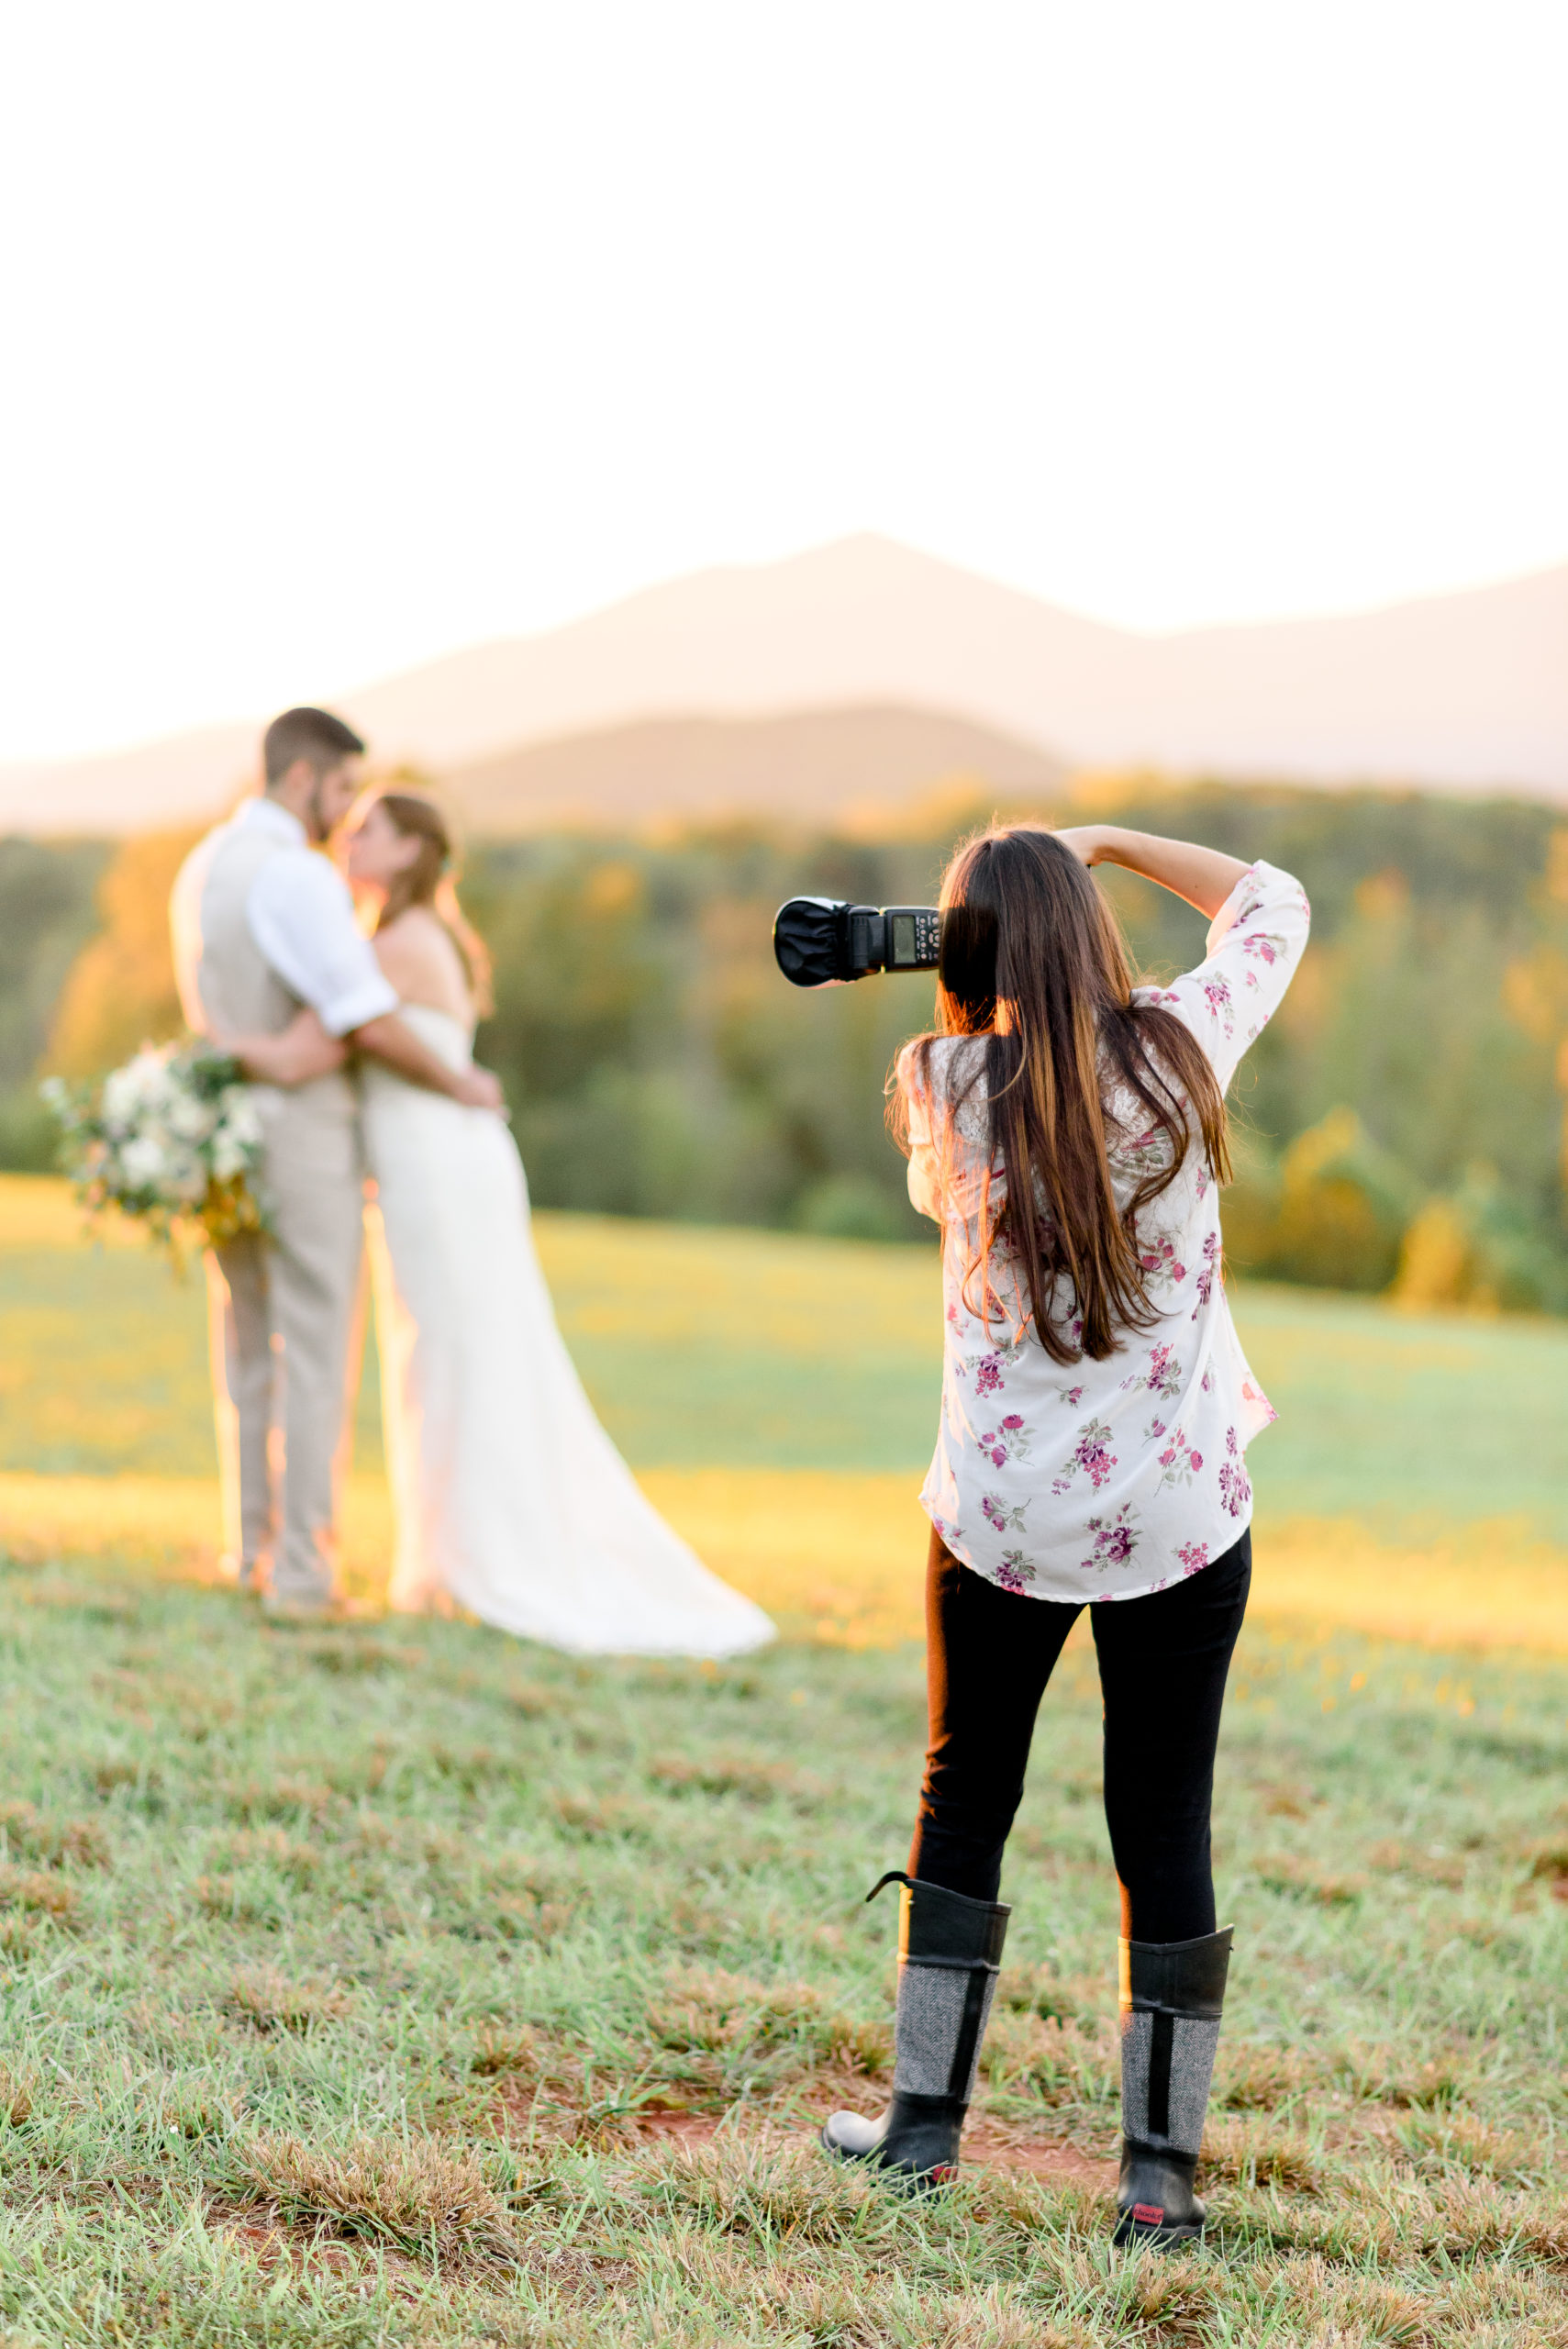 How to Photograph a Wedding in the Rain